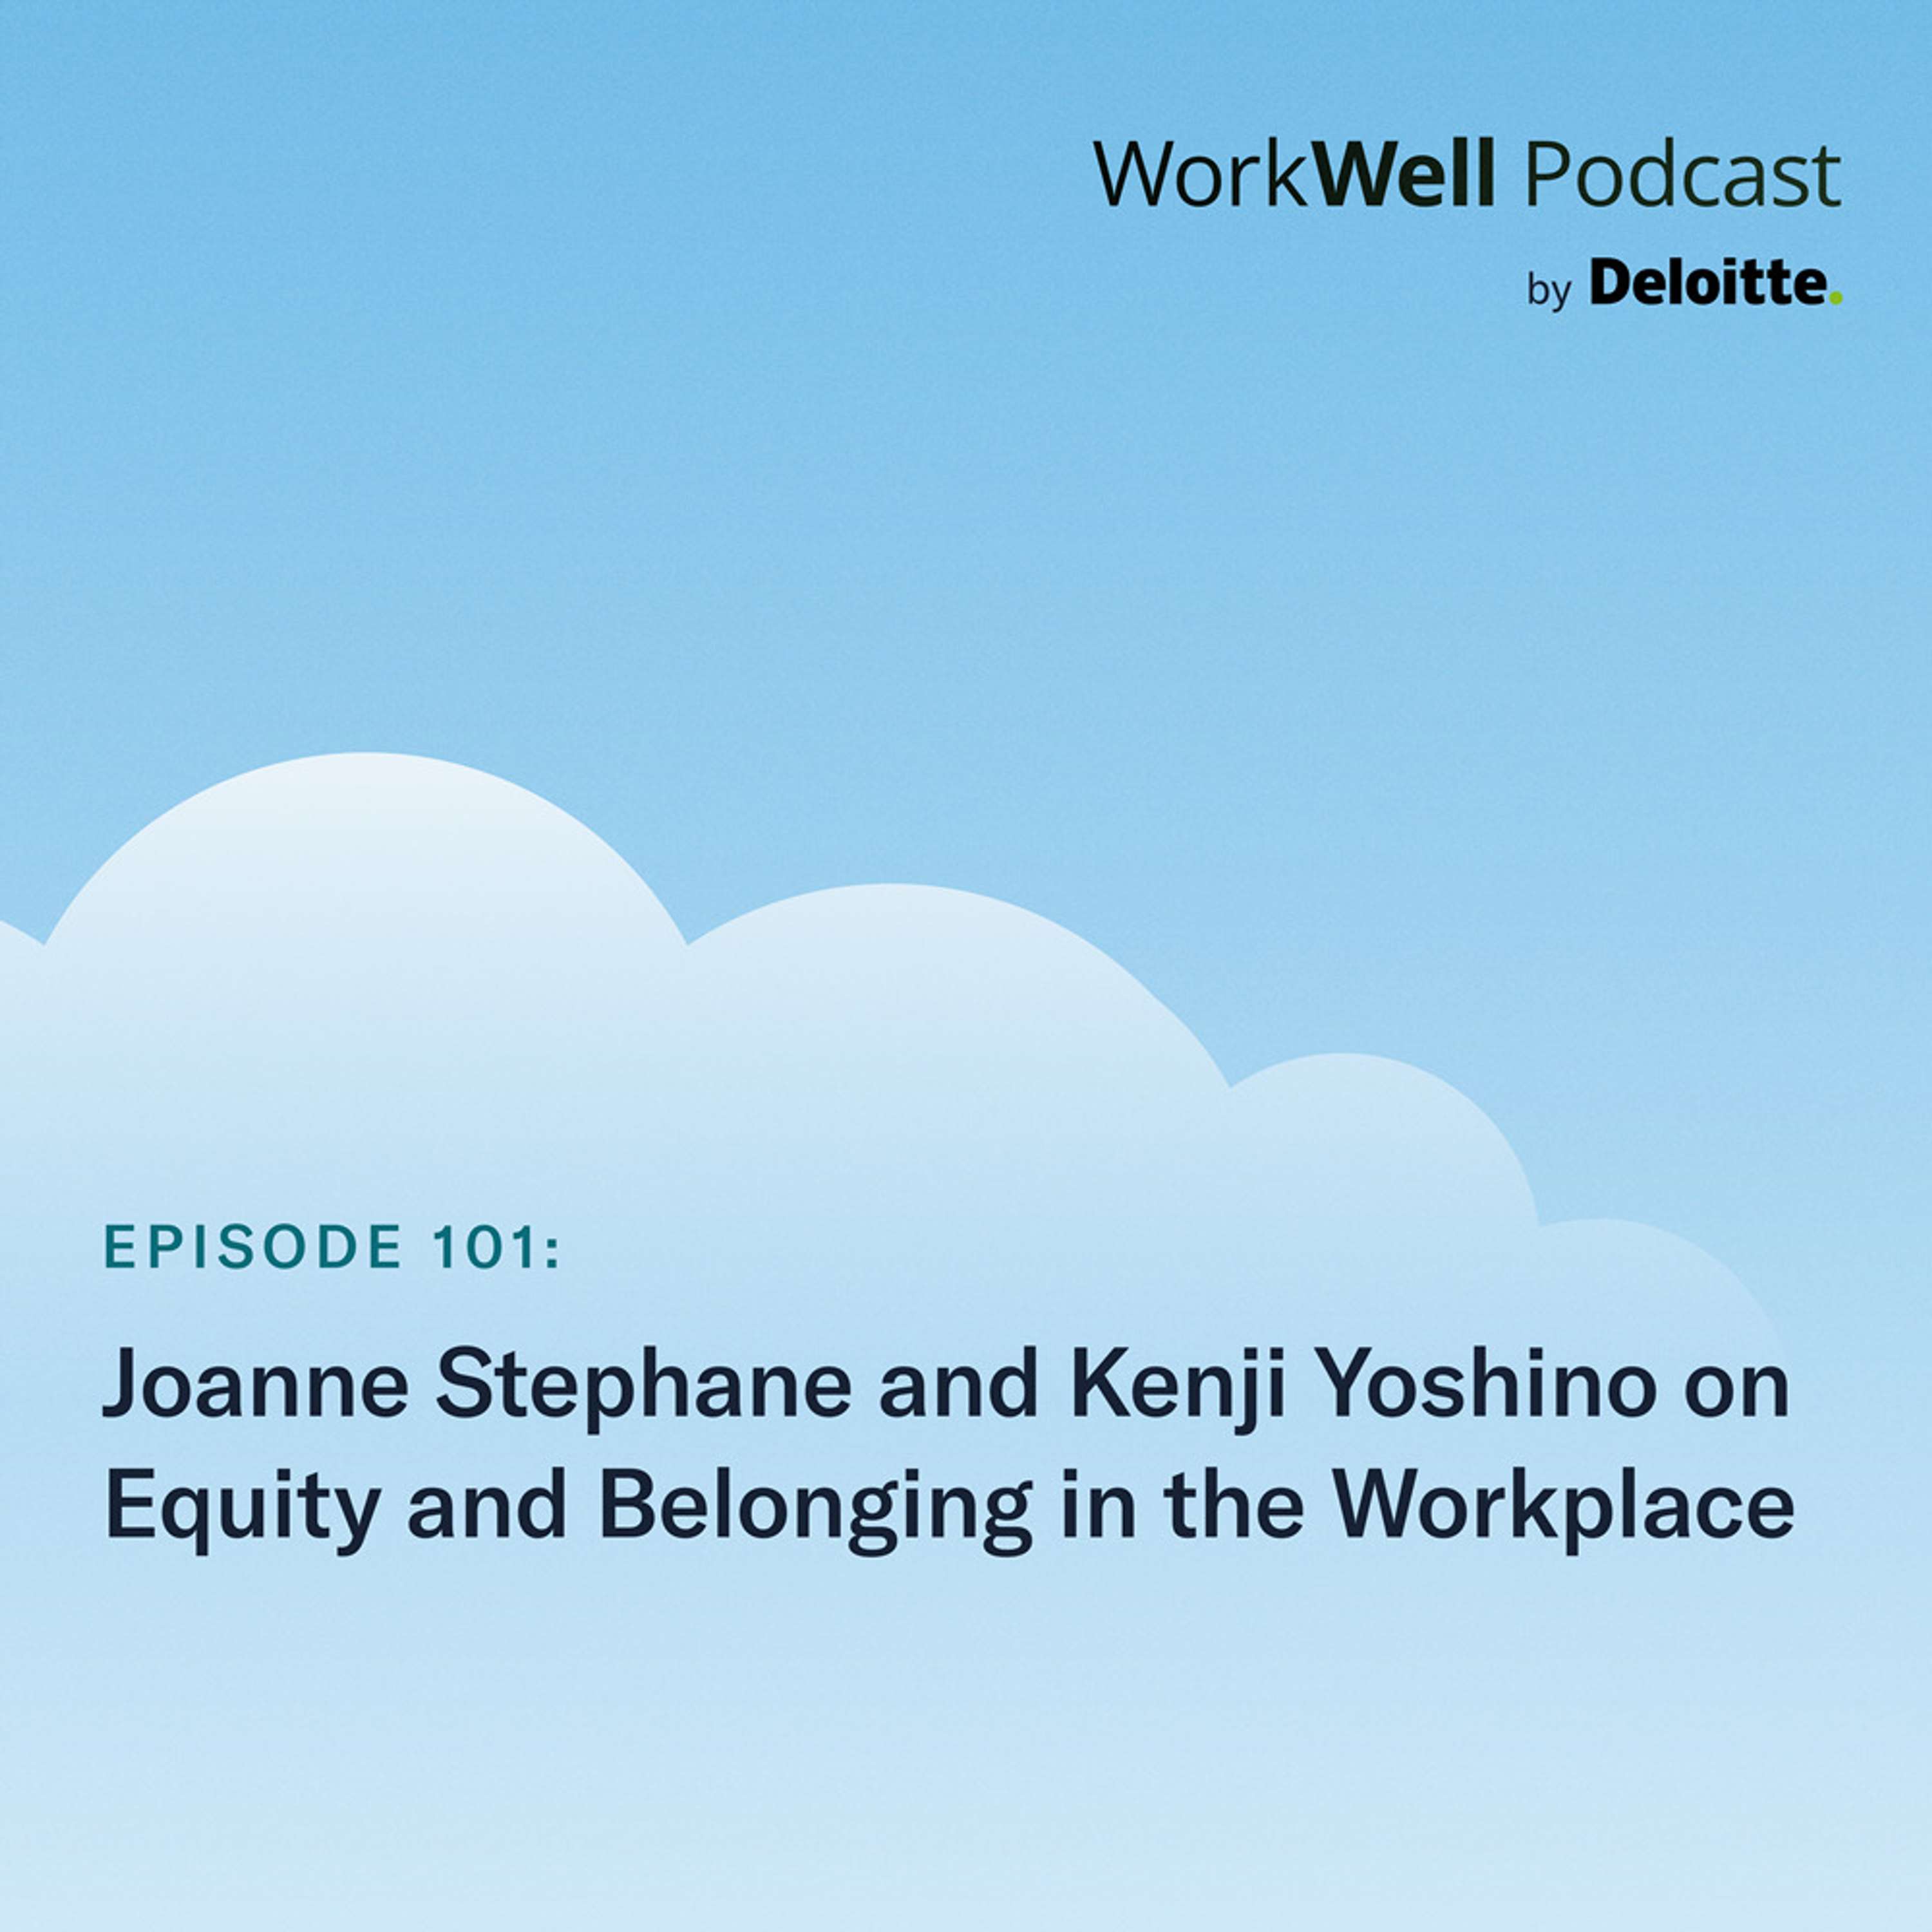 101. Joanne Stephane and Kenji Yoshino on equity and belonging in the workplace